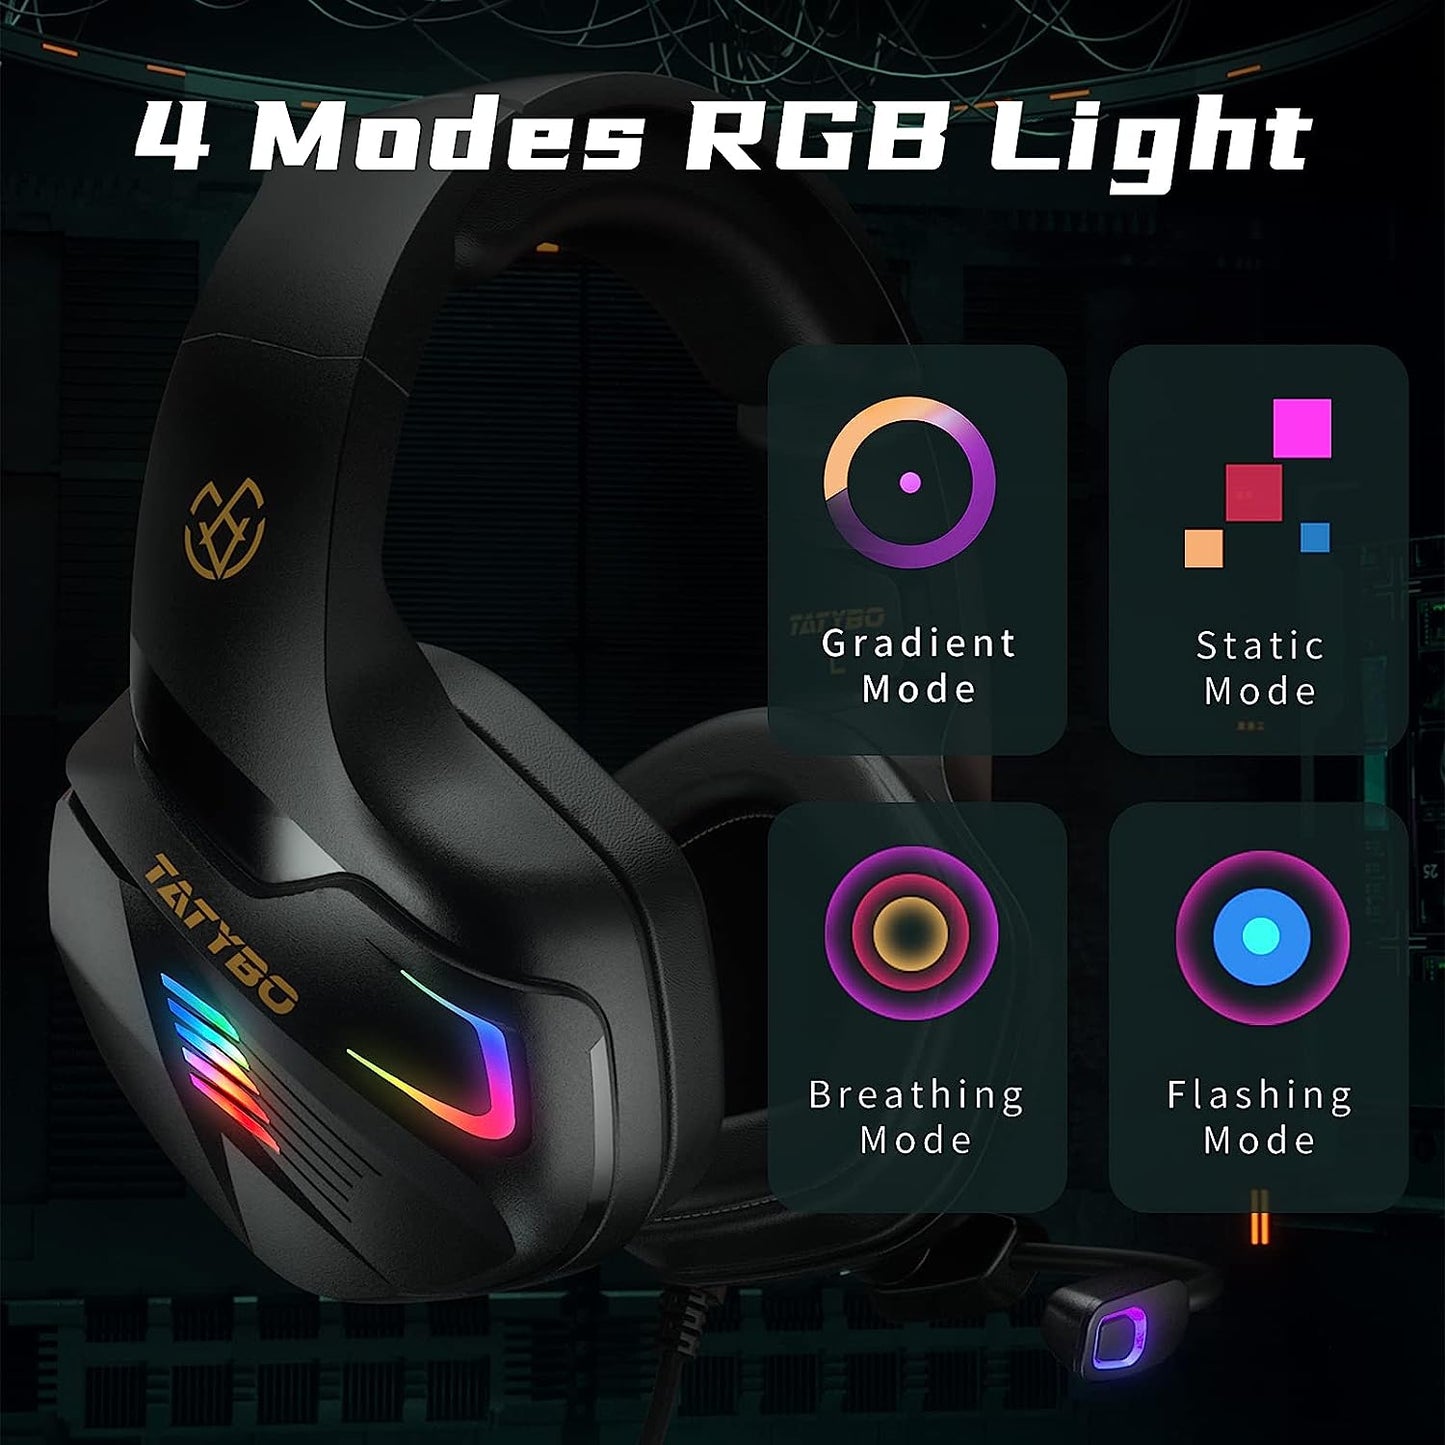 Tatybo Gaming Headset for PC PS4 PS5 Xbox One Switch with Mic, PS4 Headset with Super Big Earmuffs & 4 Modes RGB Light